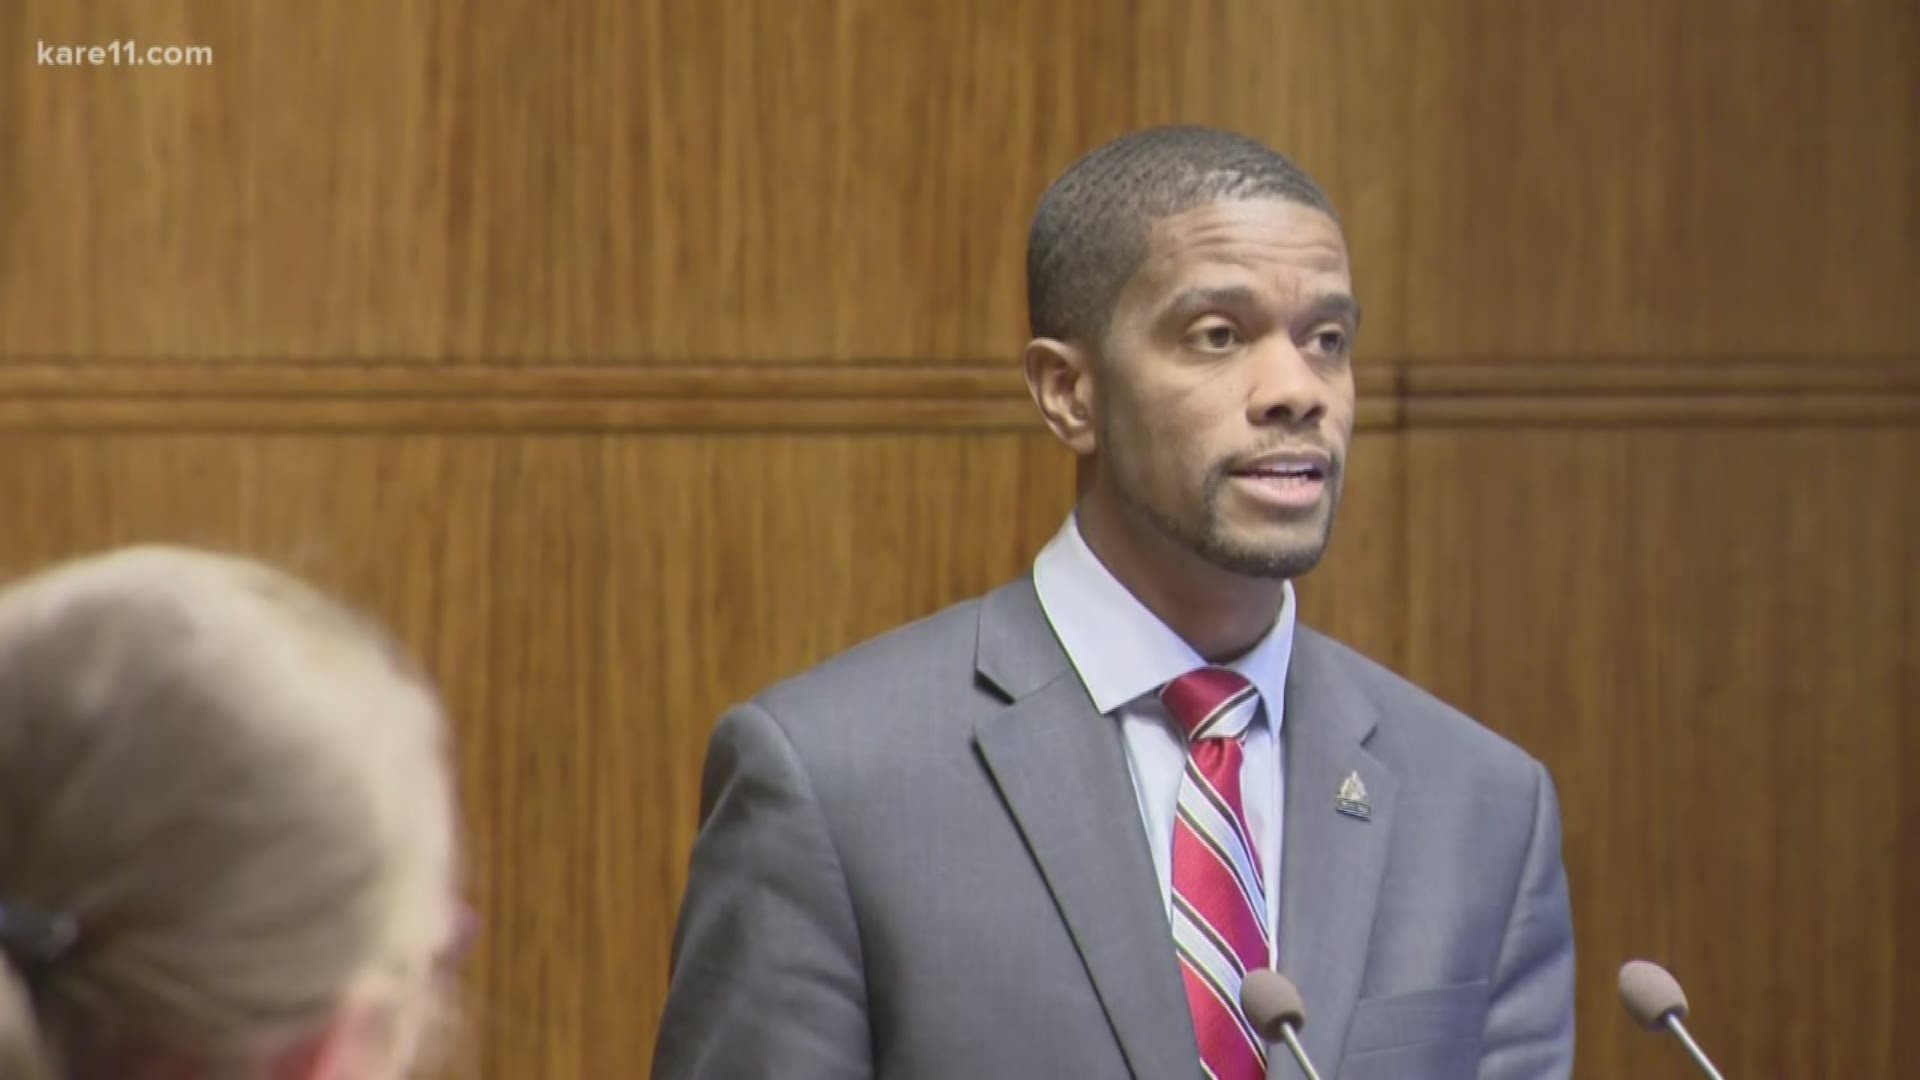 That's how much money St. Paul Mayor Melvin Carter wants from the city council to help fight the surge of recent violence.